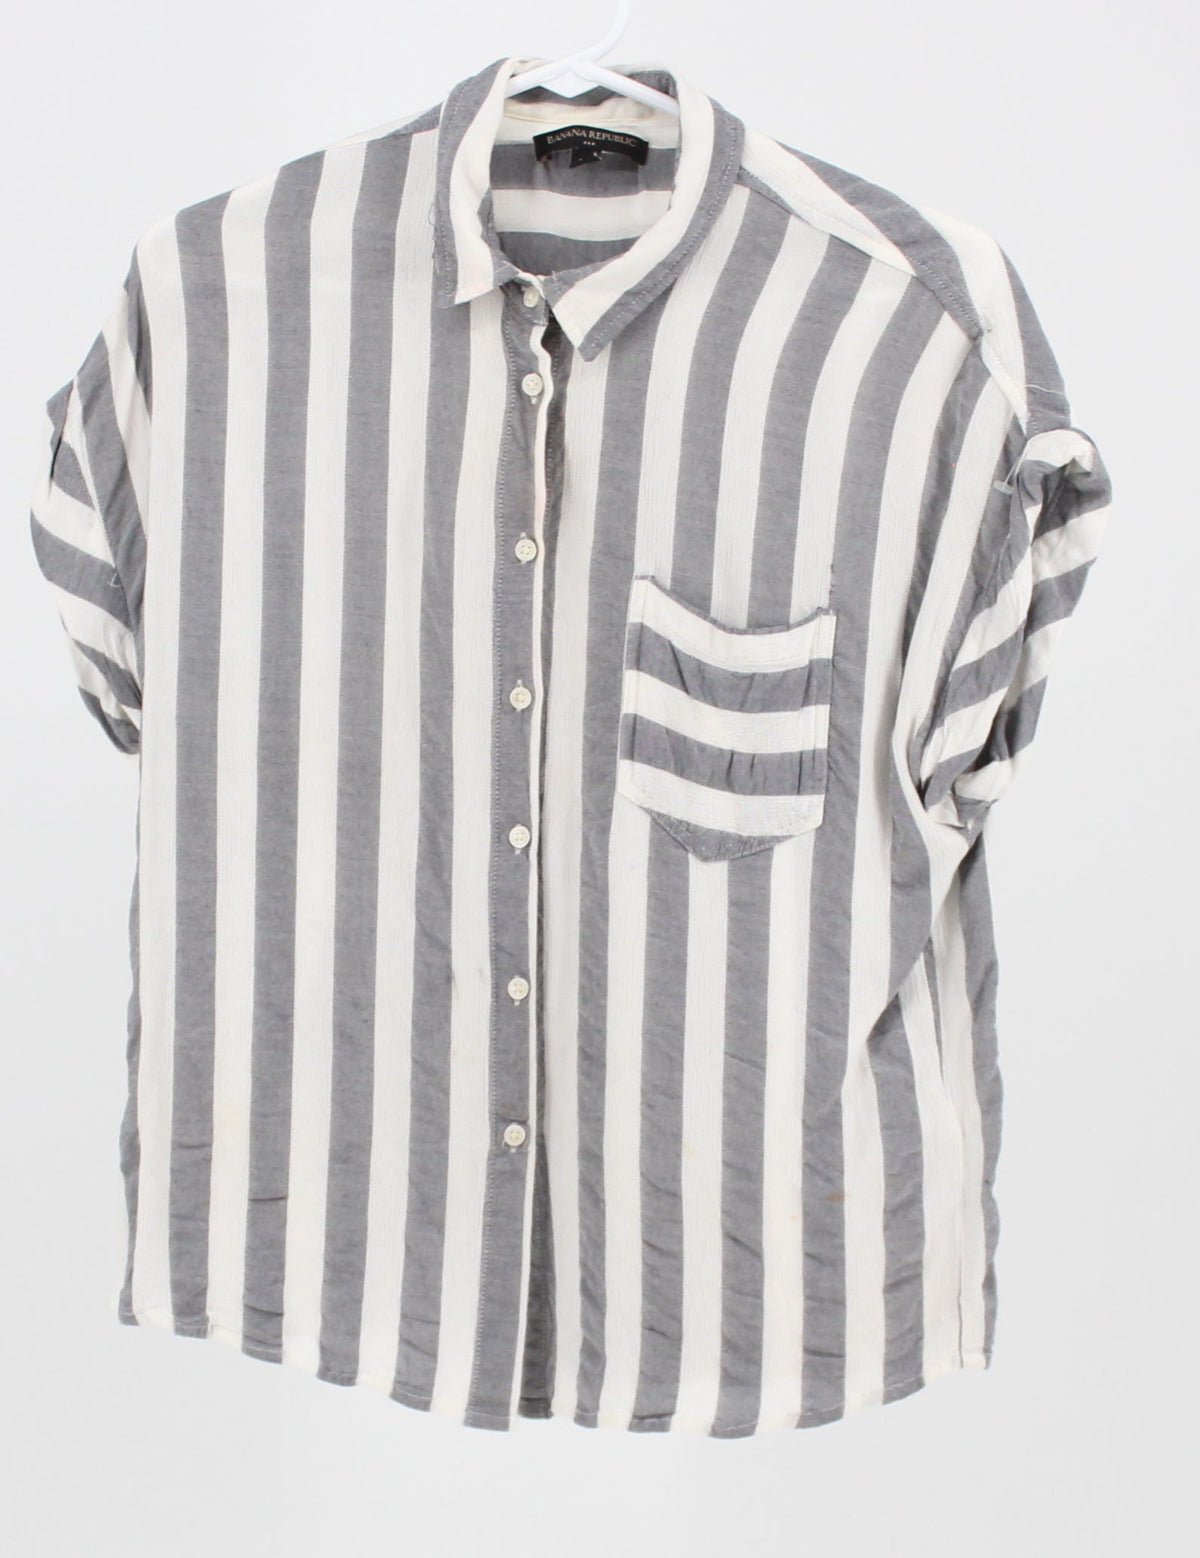 Banana Republic grey and white striped short sleeve button up with front pocket